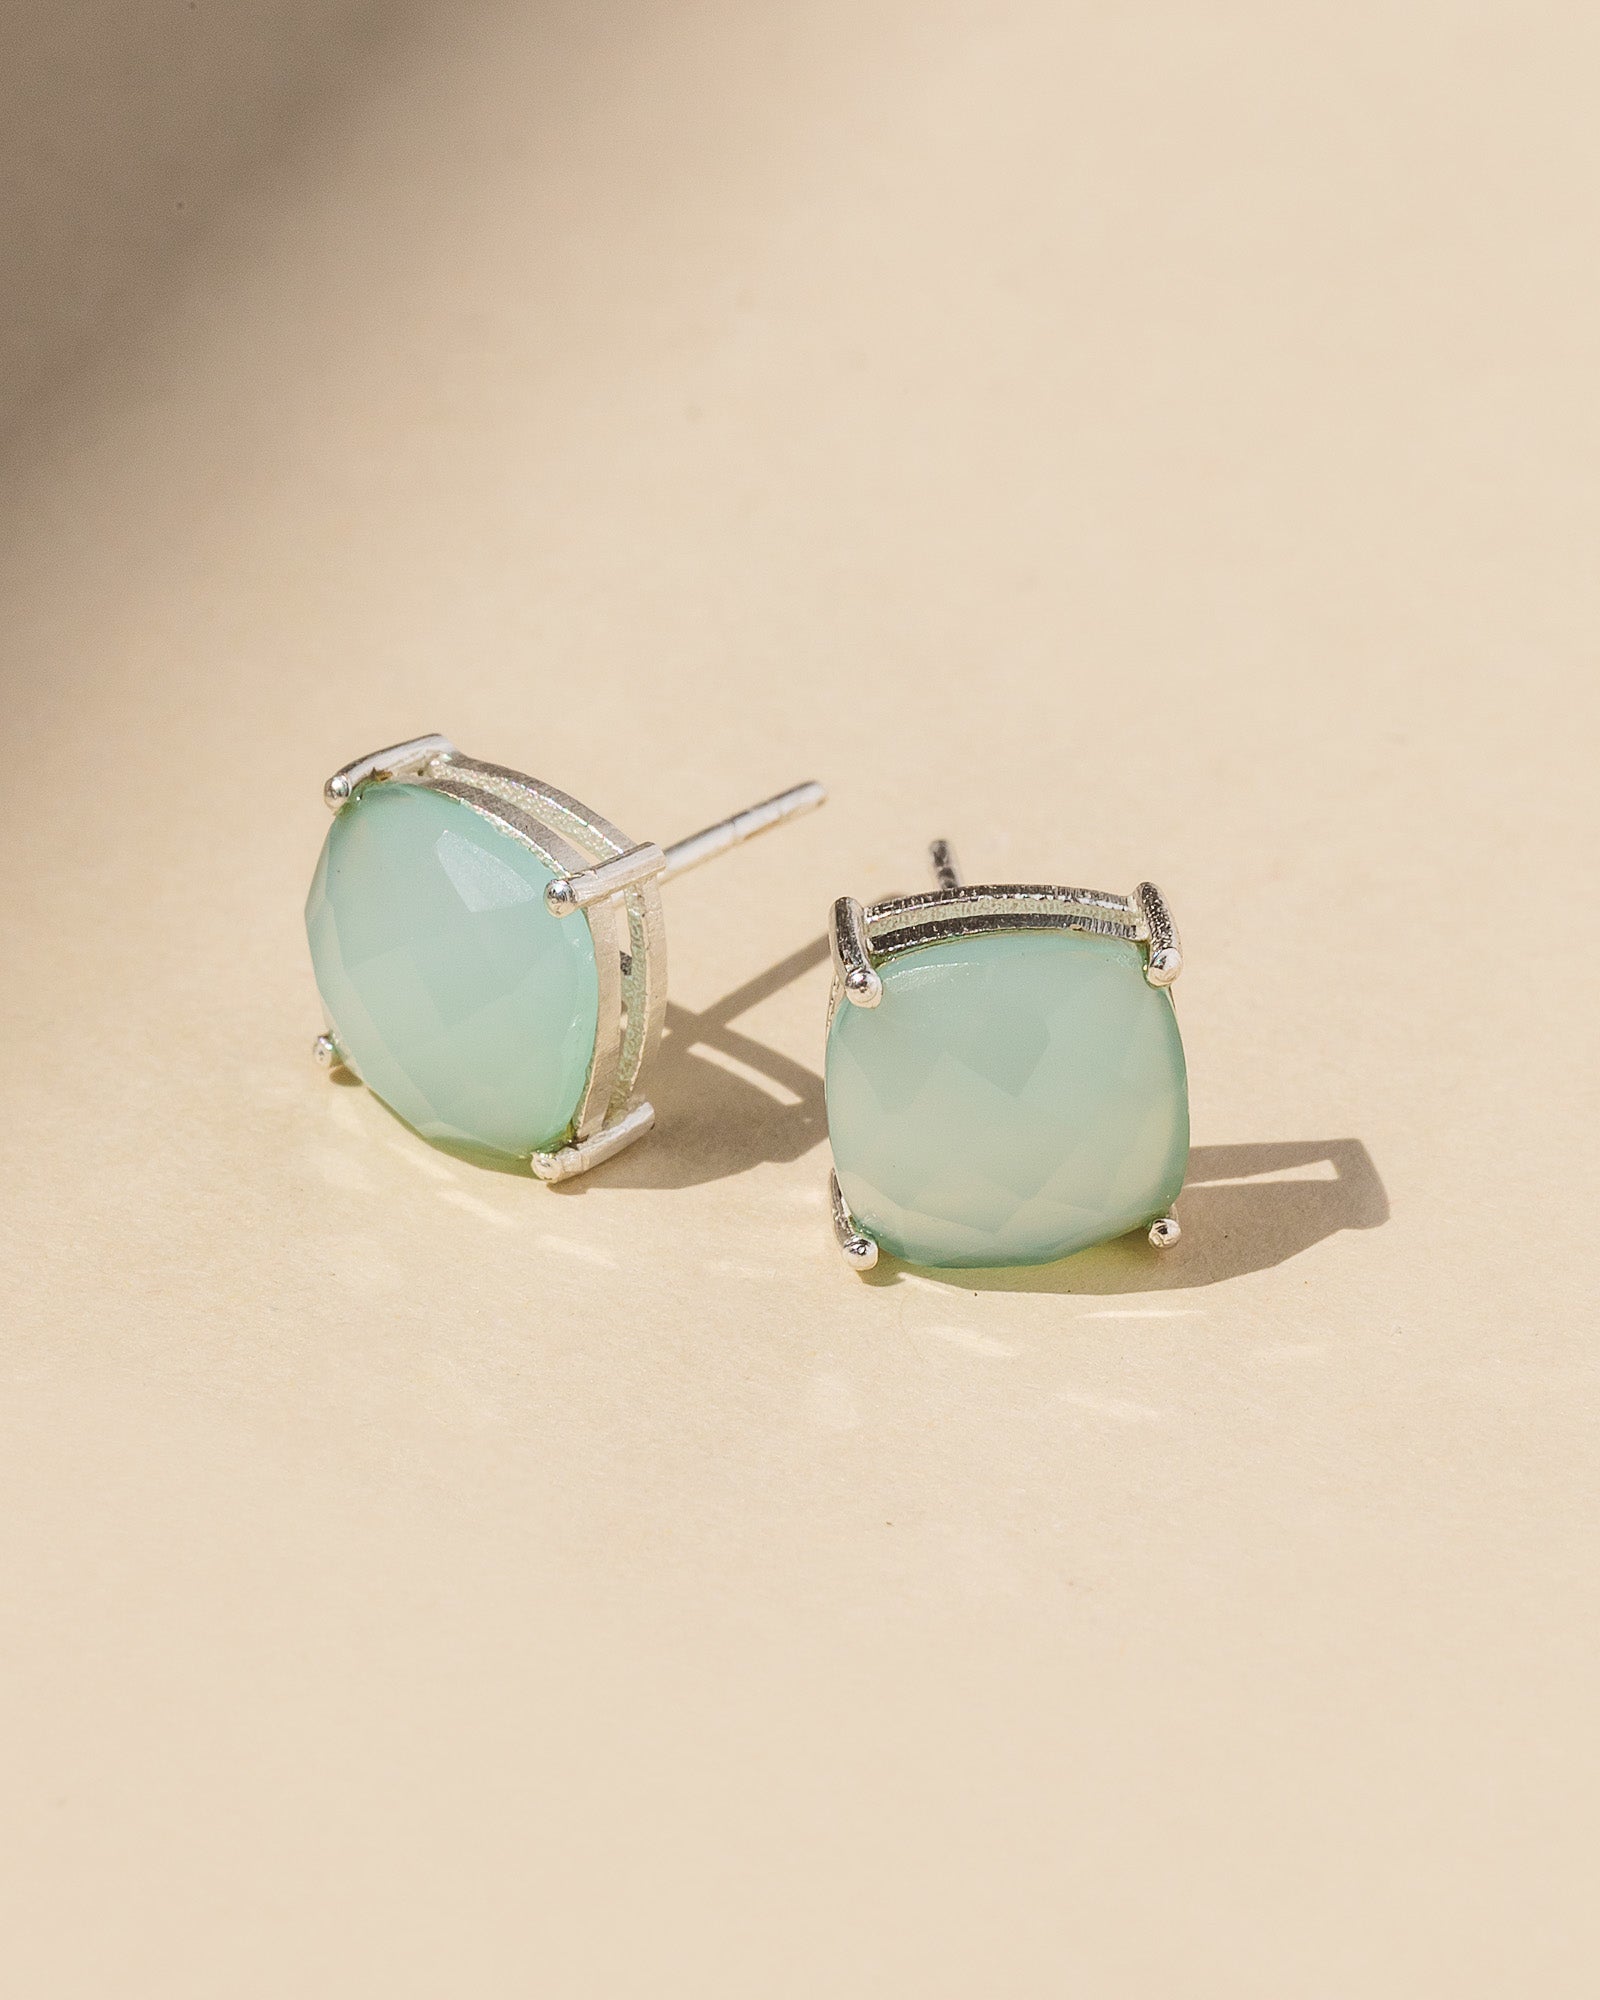 Tranquility Studs - Trades of Hope 